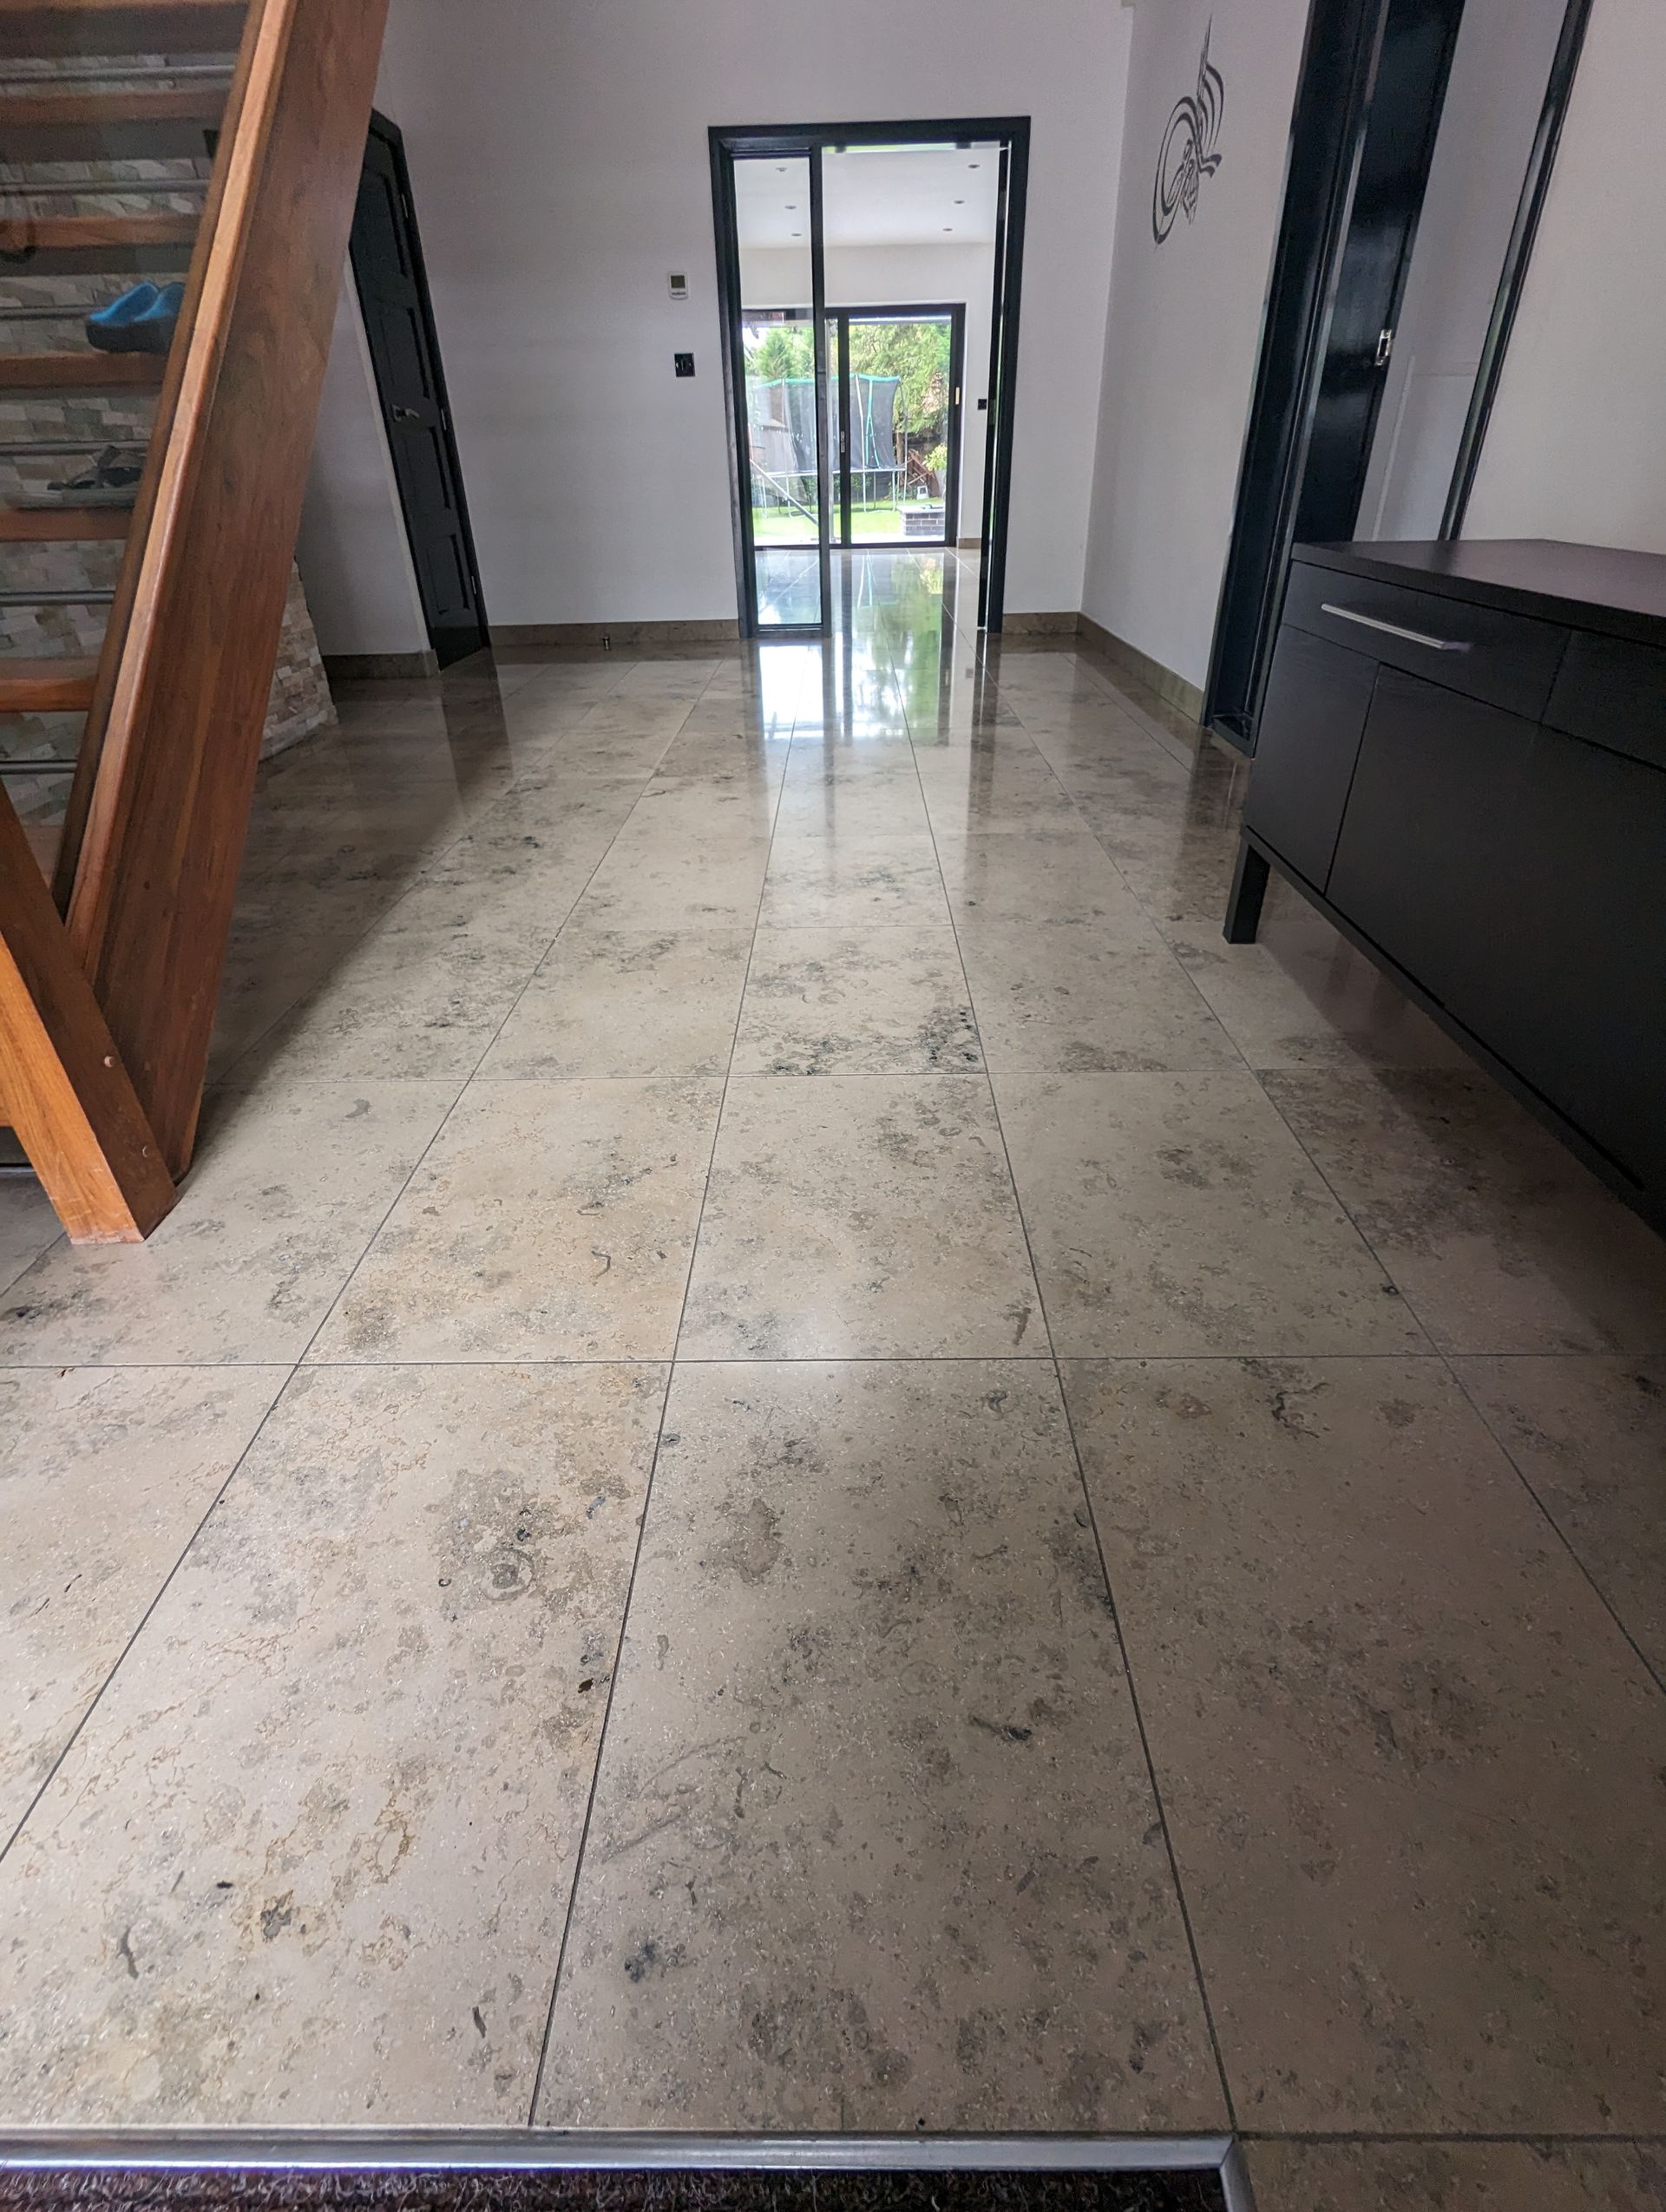 Marble floor deep cleaning, polishing, sealing and grout cleaning in Greater Manchester. Filling in holes with a resin filler.